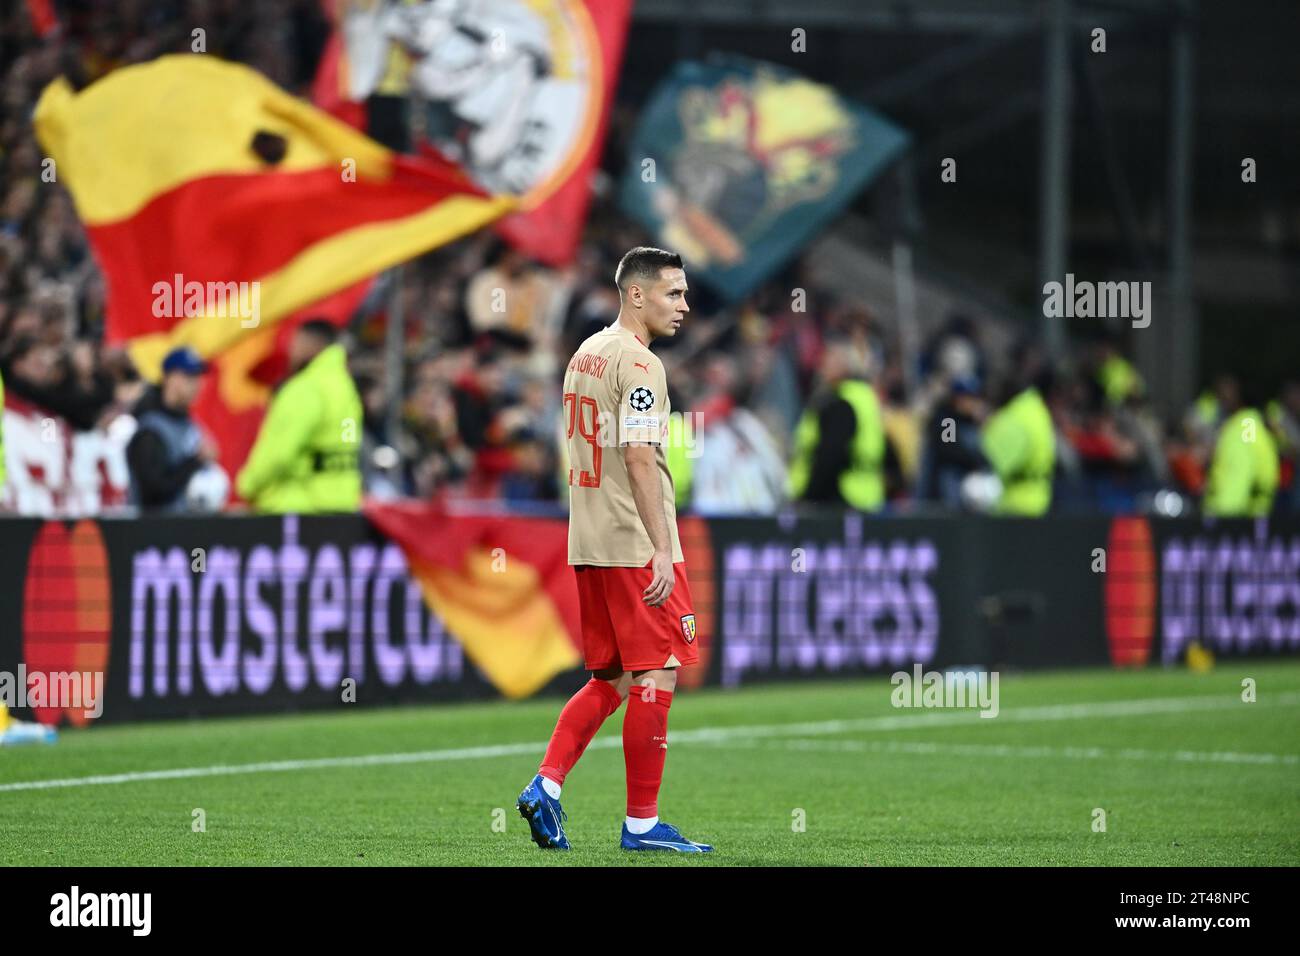 LENS, FRANCE - OCTOBER 24: Przemyslaw Frankowski of RC Lens during the UEFA Champions League match between RC Lens and PSV Eindhoven at Stade Bollaert Stock Photo